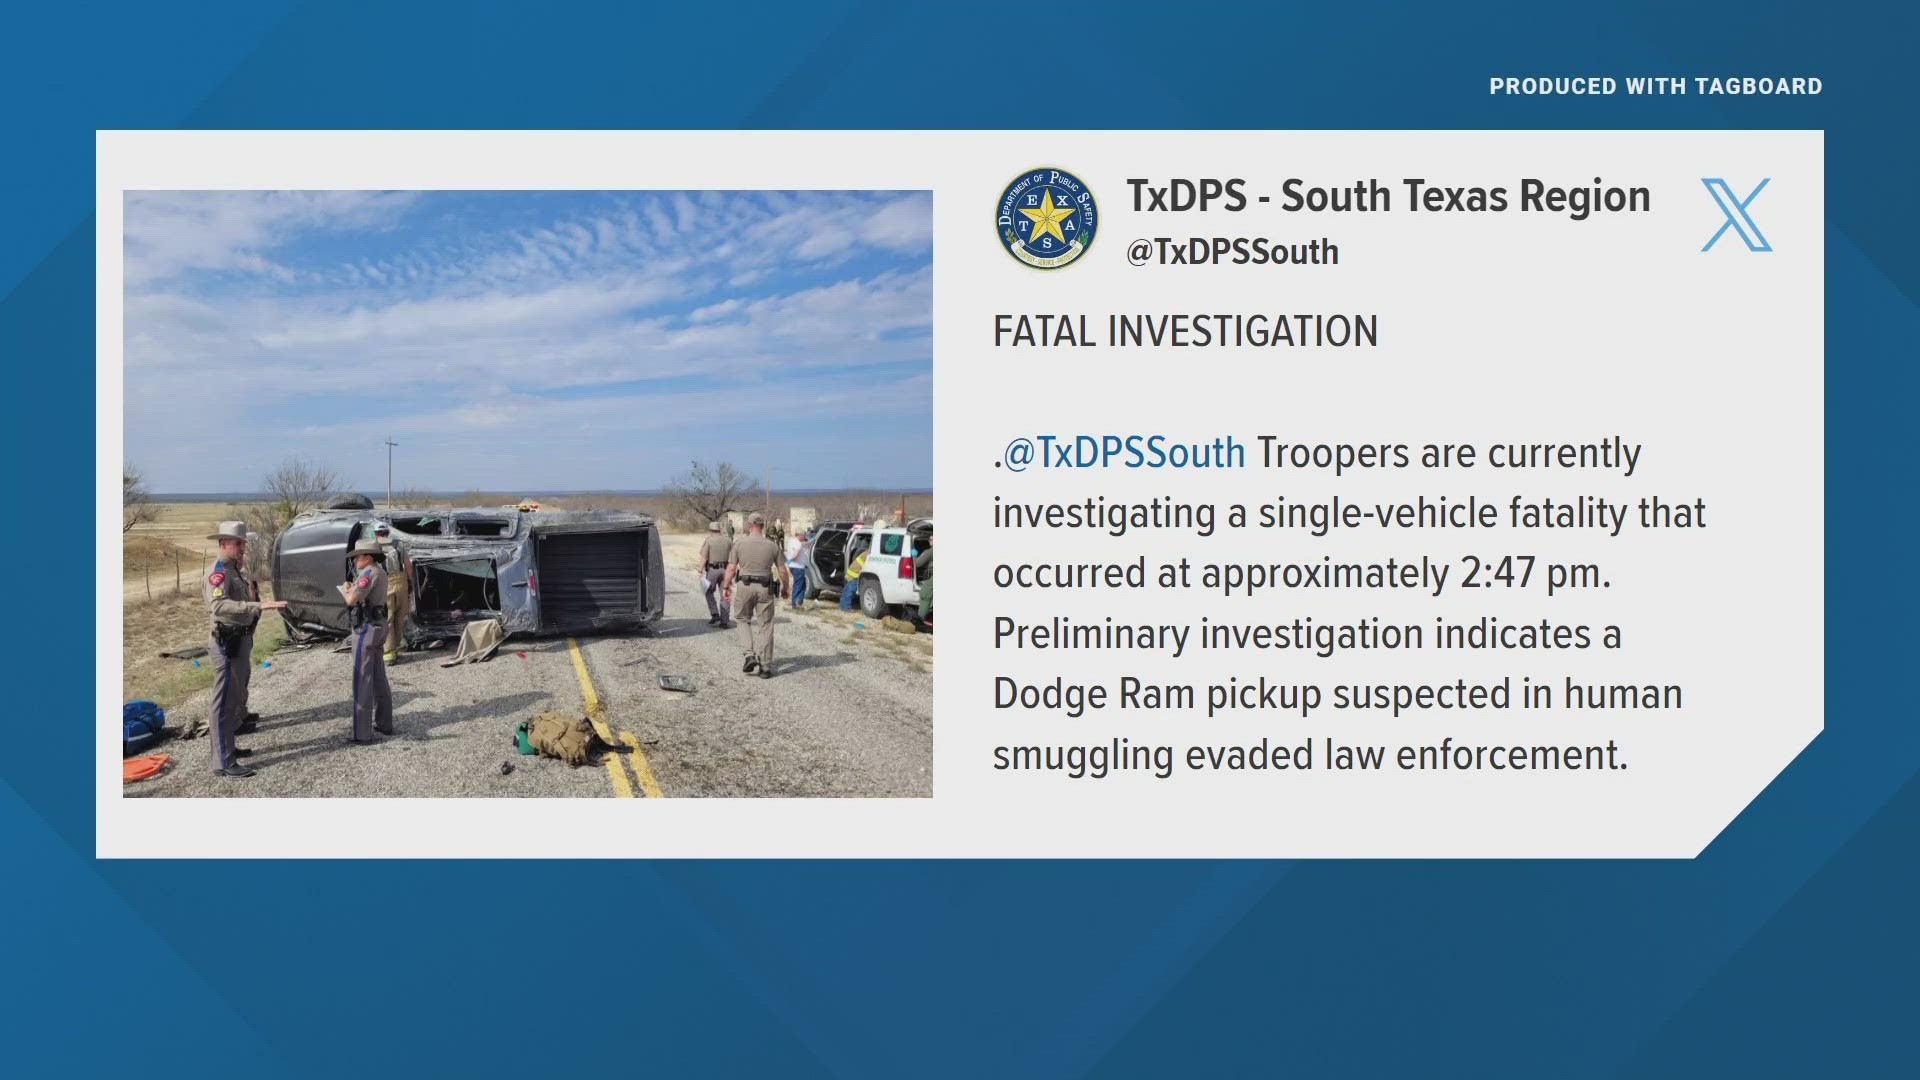 Two dead after truck suspected of human smuggling crashed near the Texas-Mexico border